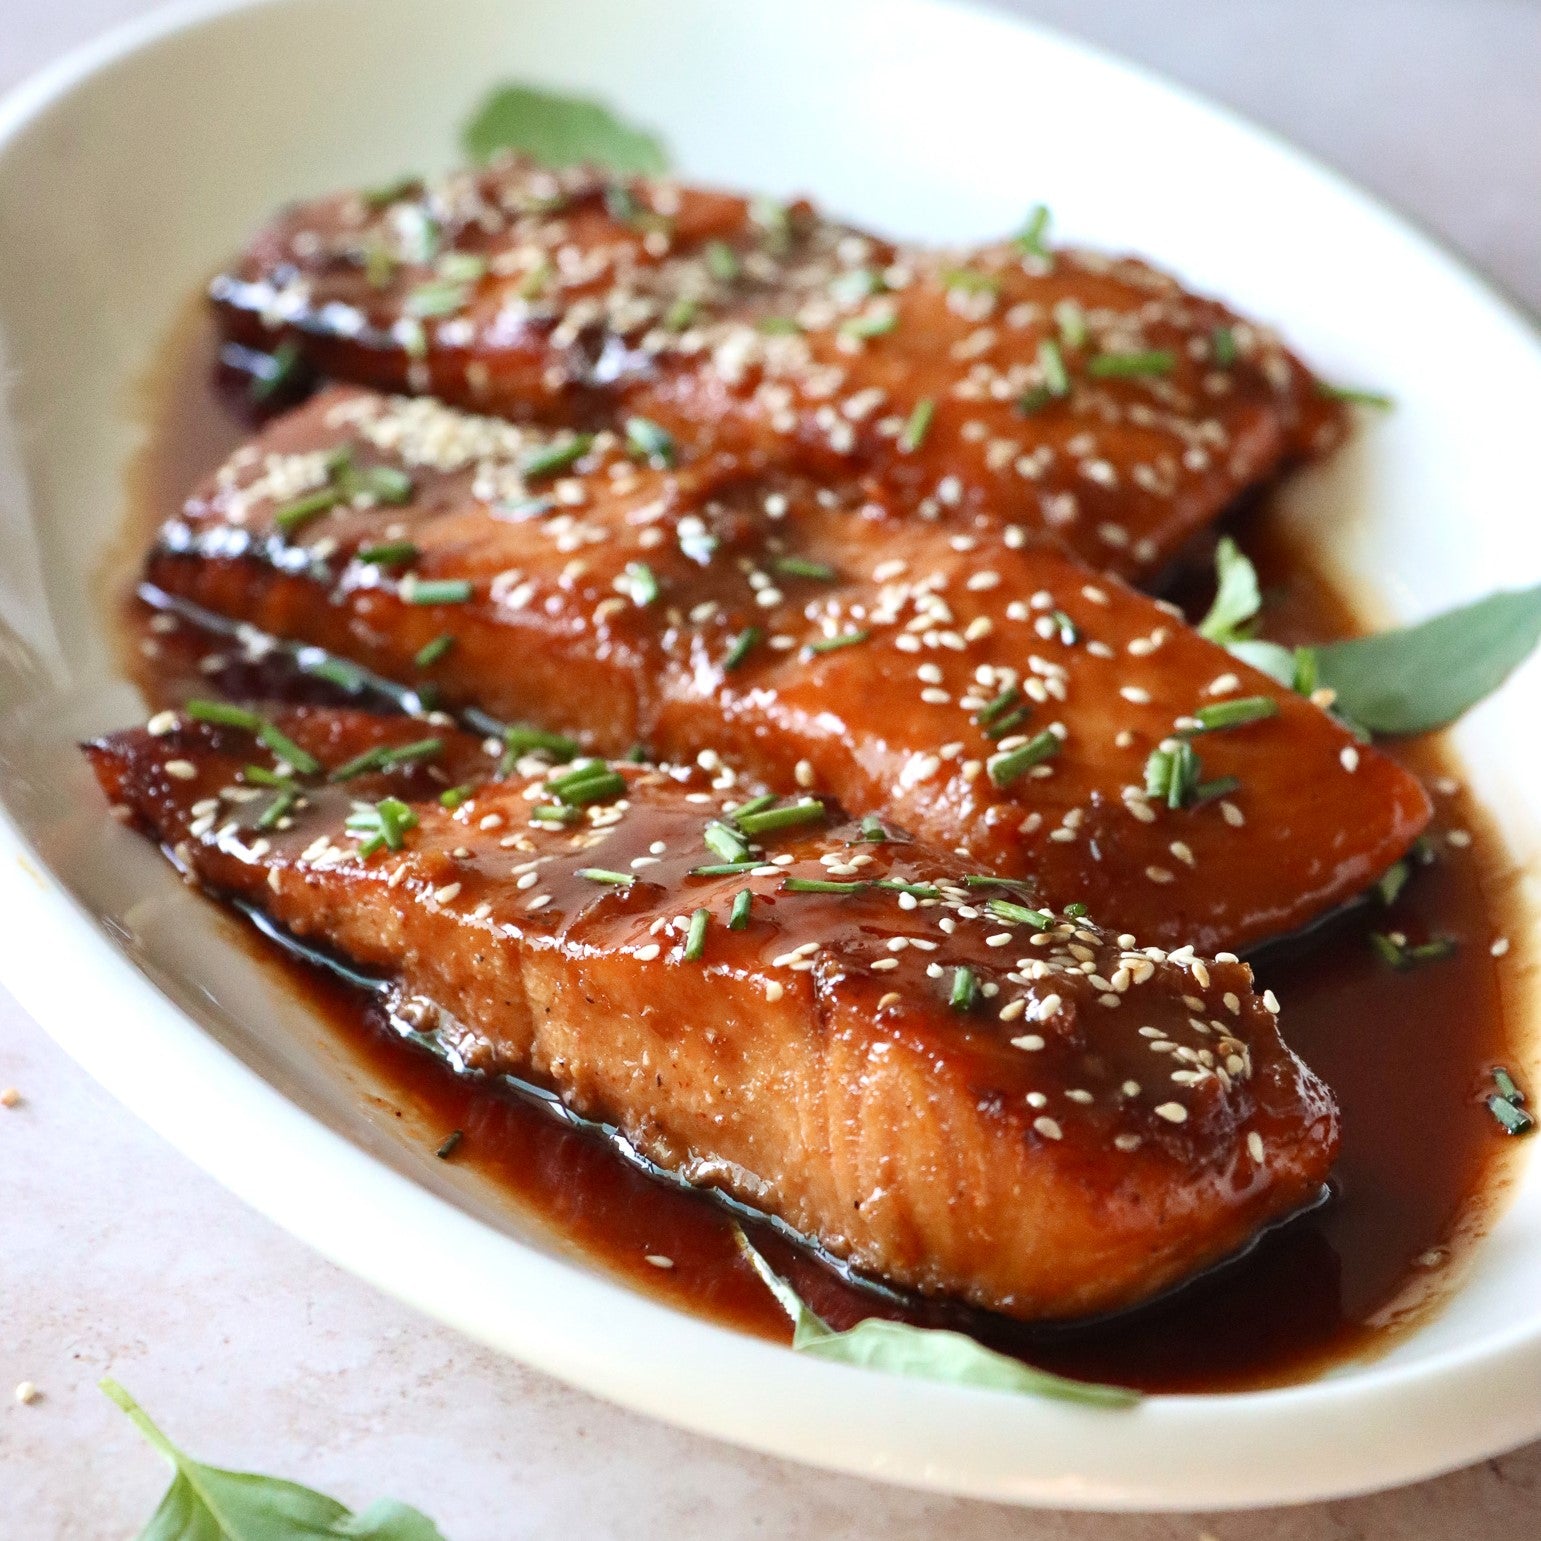 three 5 ounce portions of maple glazed salmon topped with chives and sesame seeds on a white serving plate